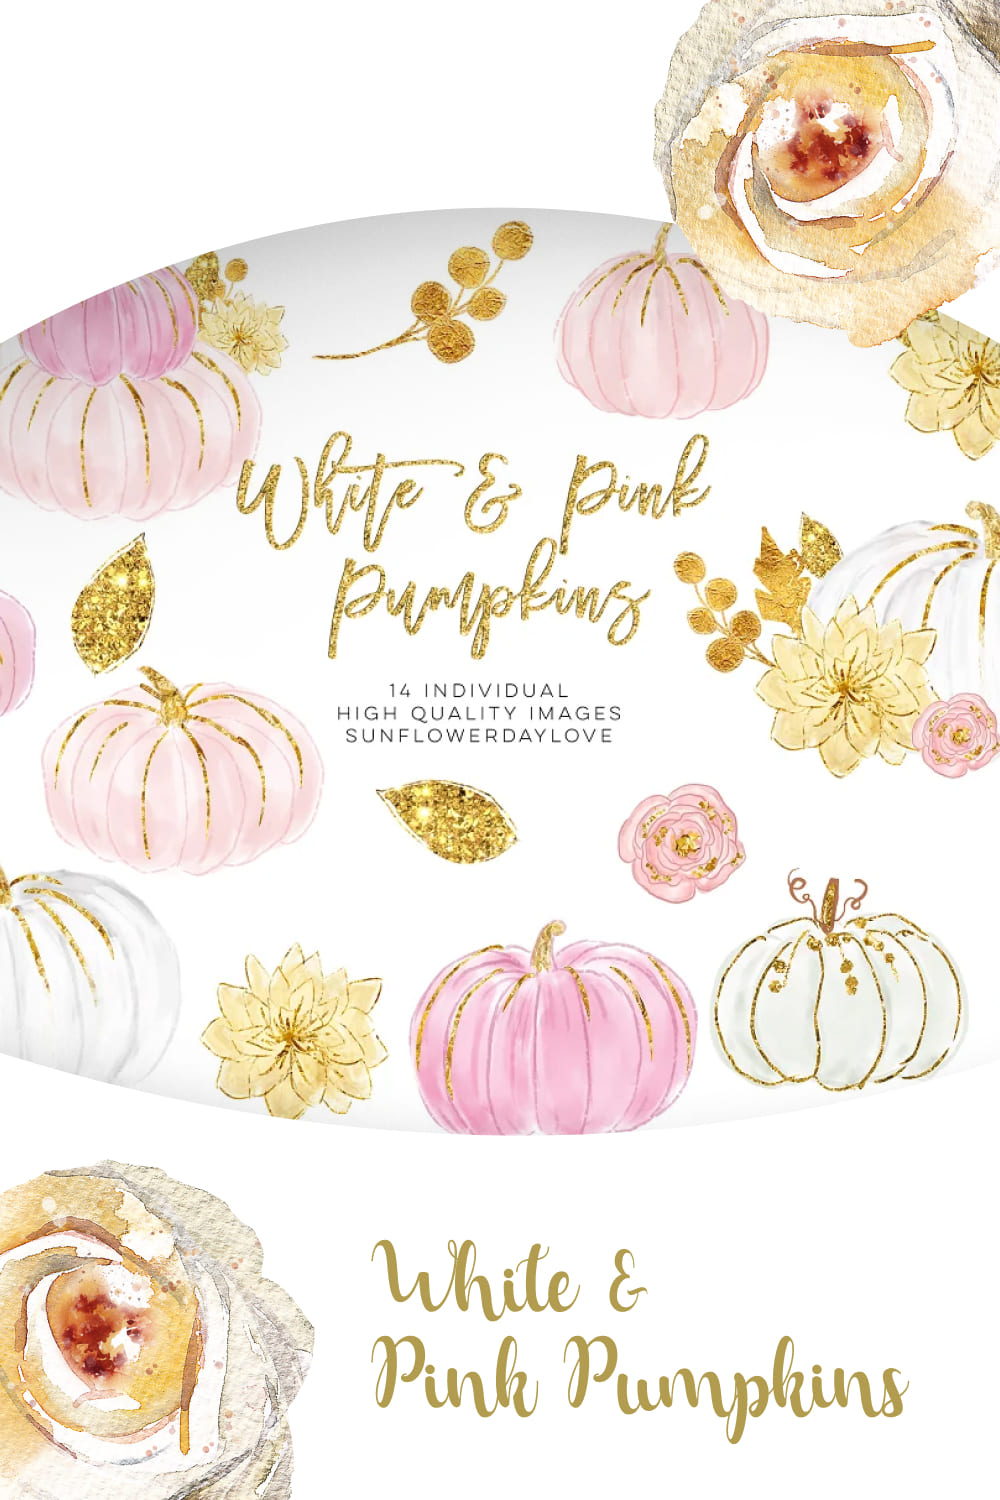 03 white and pink pumpkins1000x1500